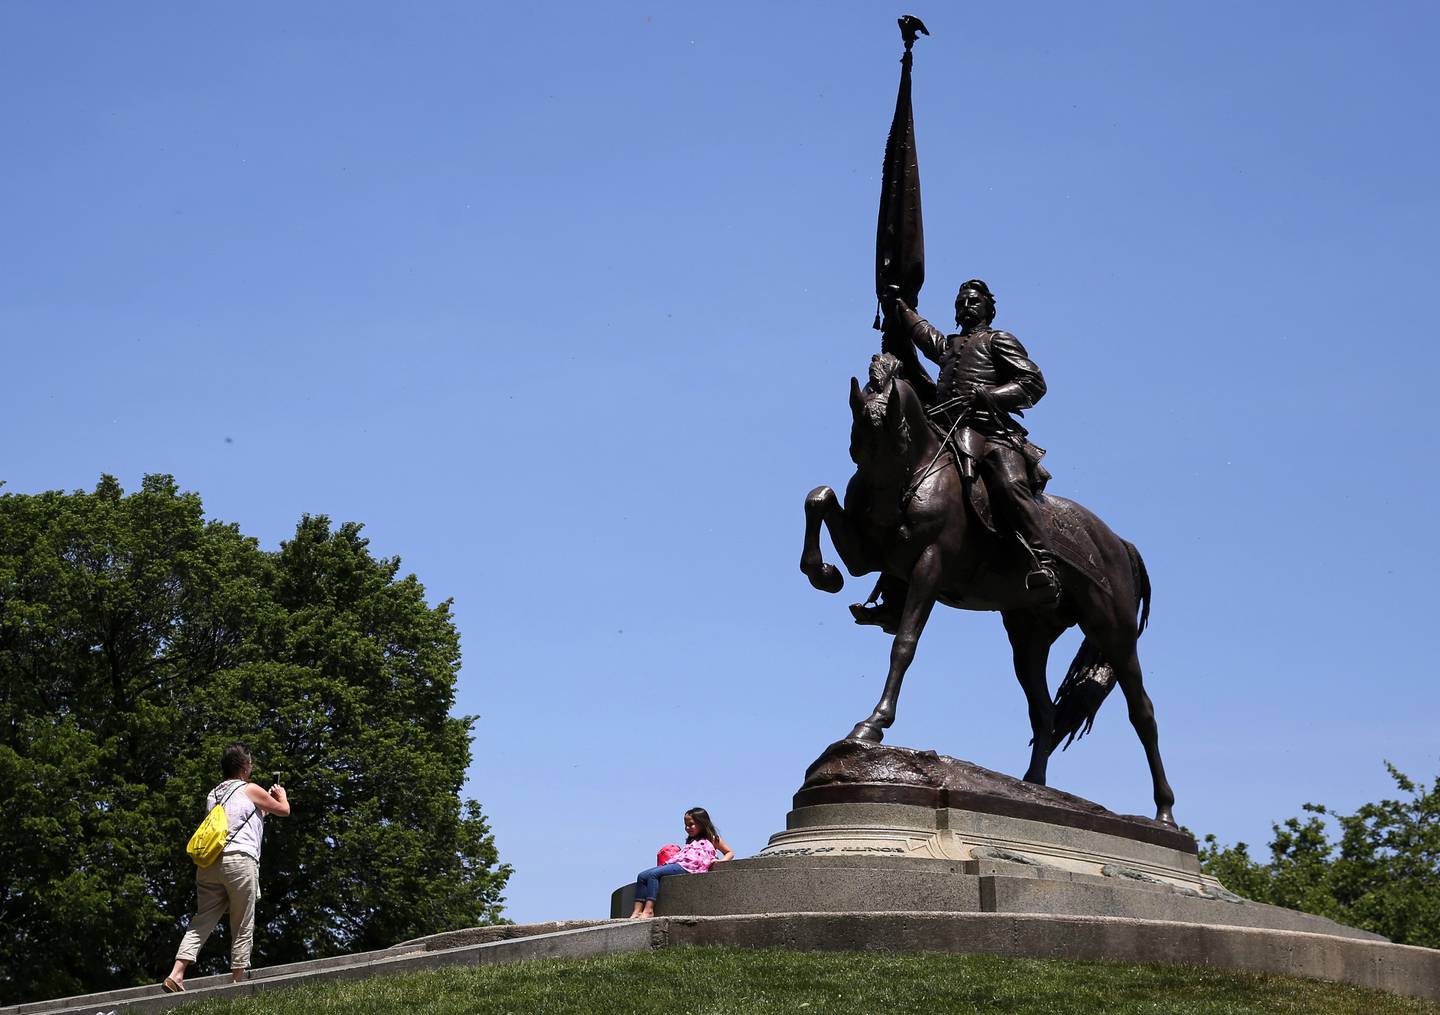 Park visitors in 2016 take pictures by the statue of Union Army Maj. Gen. John A. Logan in Grant Park in Chicago. Logan, known as the "Father of Memorial Day," ordered in 1868 that: "The 30th day of May is designated for the purpose of strewing with flowers or otherwise decorating the graves of comrades who died in defense of their country..." to honor the nearly 500,000 lives lost in the U.S. Civil War. First known as Decoration Day, Memorial Day expanded to an observance honoring all U.S. war dead after World War I and in 1971 was made an official national holiday to be held on the last Monday in May.